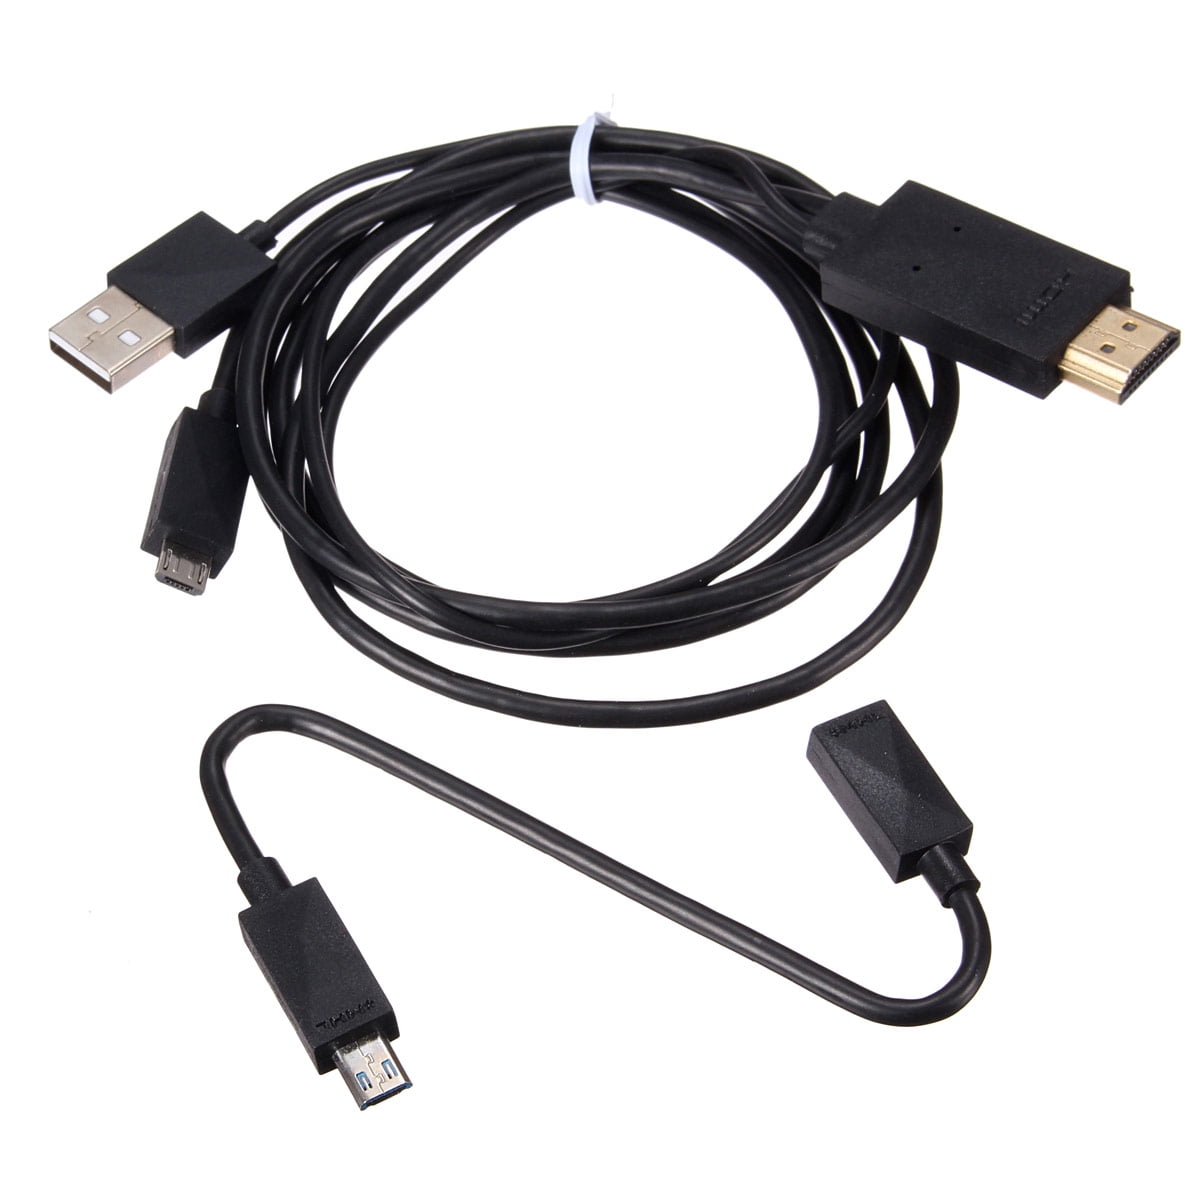 FYL 3M MHL Micro USB to HDMI HDTV Coverter Cable Adapter Connector For HTC One M7 M8 